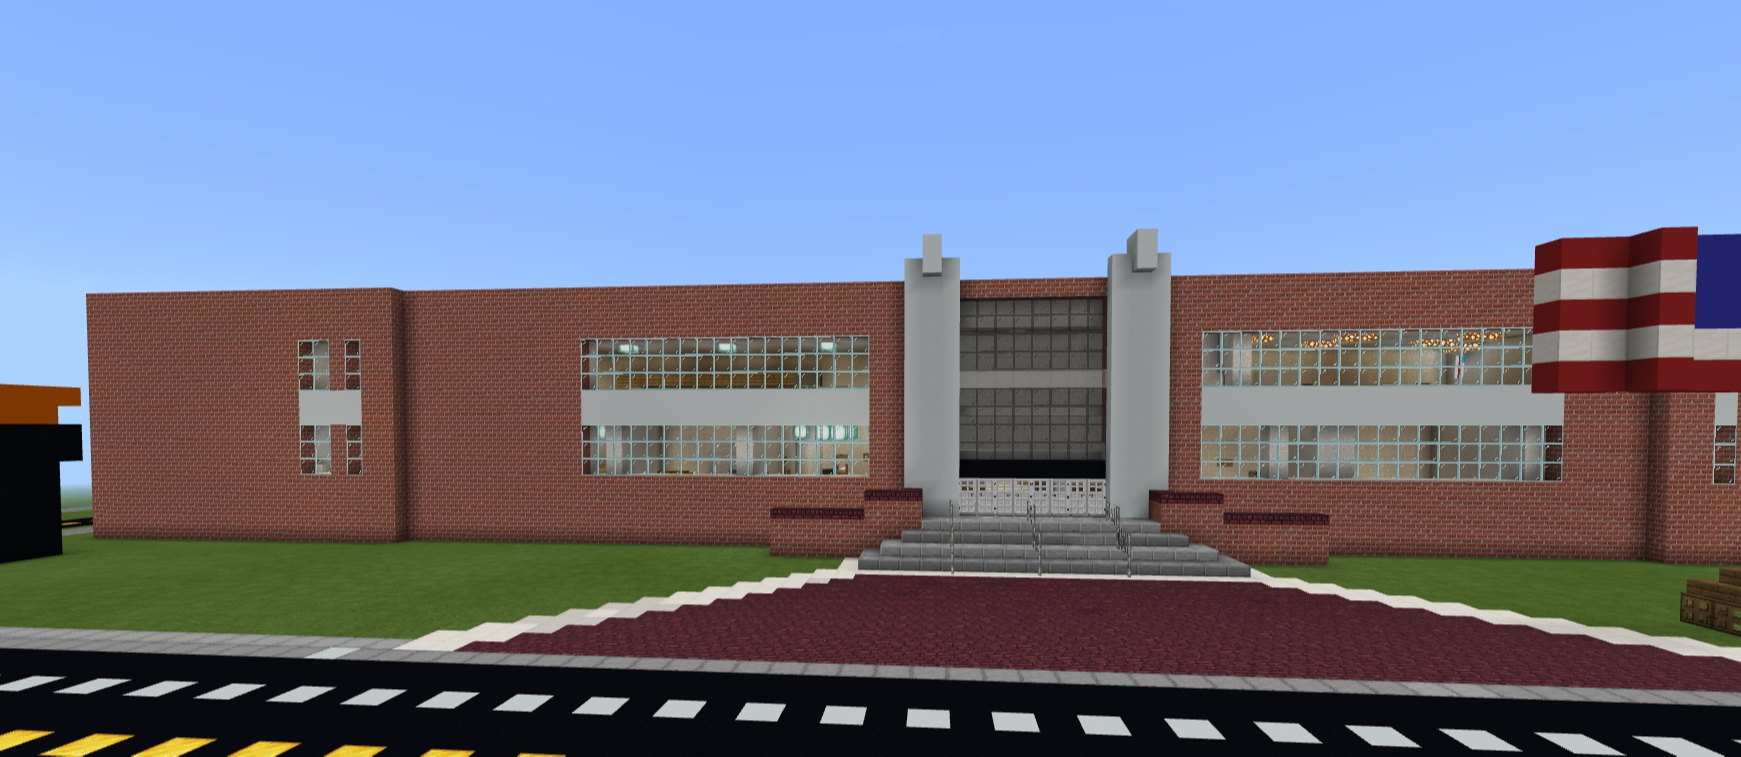 JMS: Minecraft created image of Jonesville Middle School with american flag out front